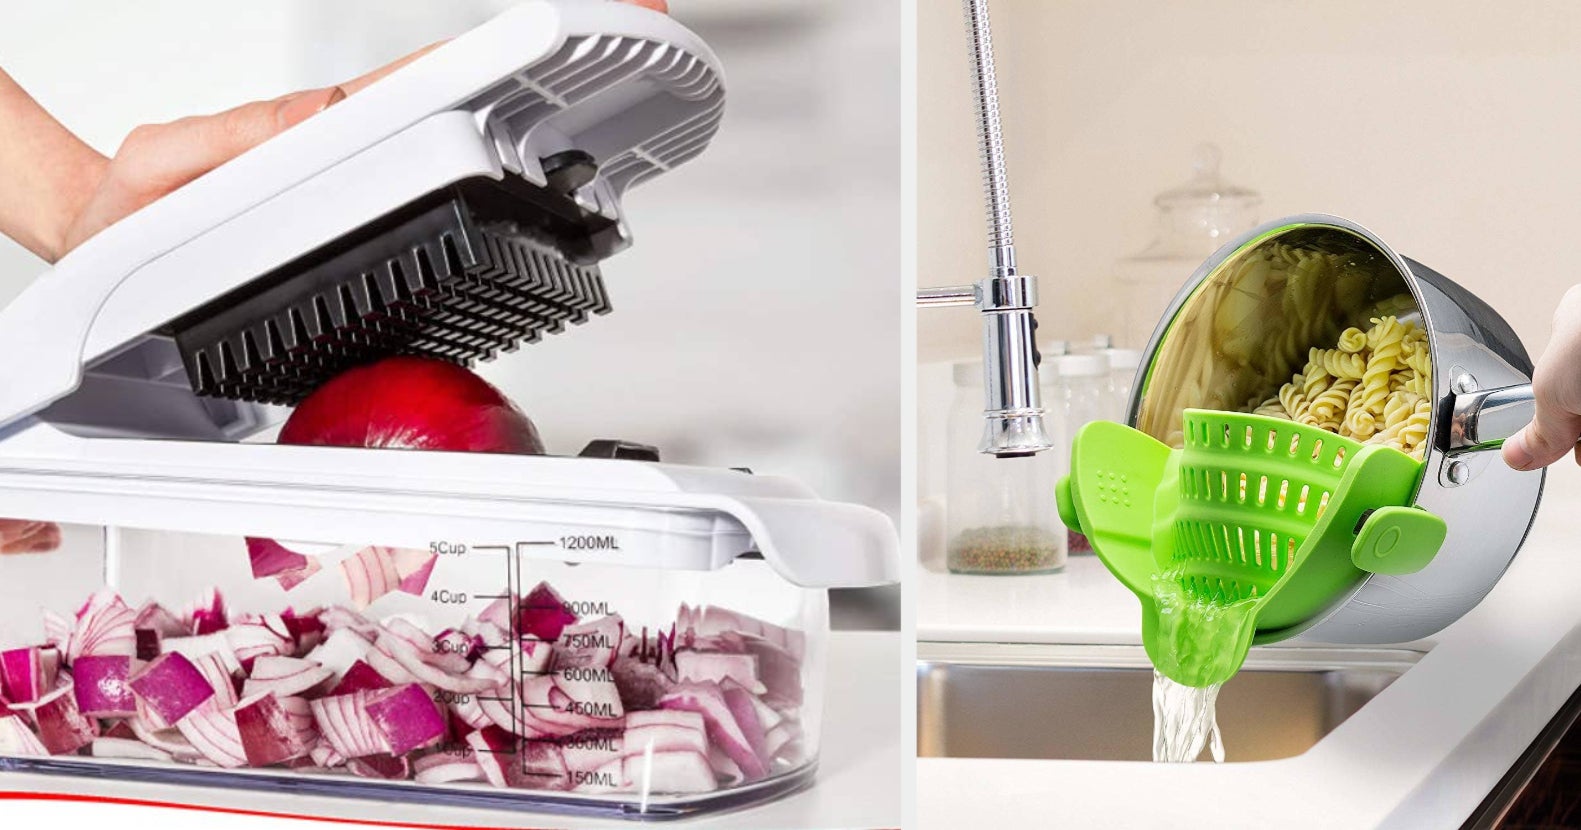 12 kitchen gadgets for every home cook, according to an expert